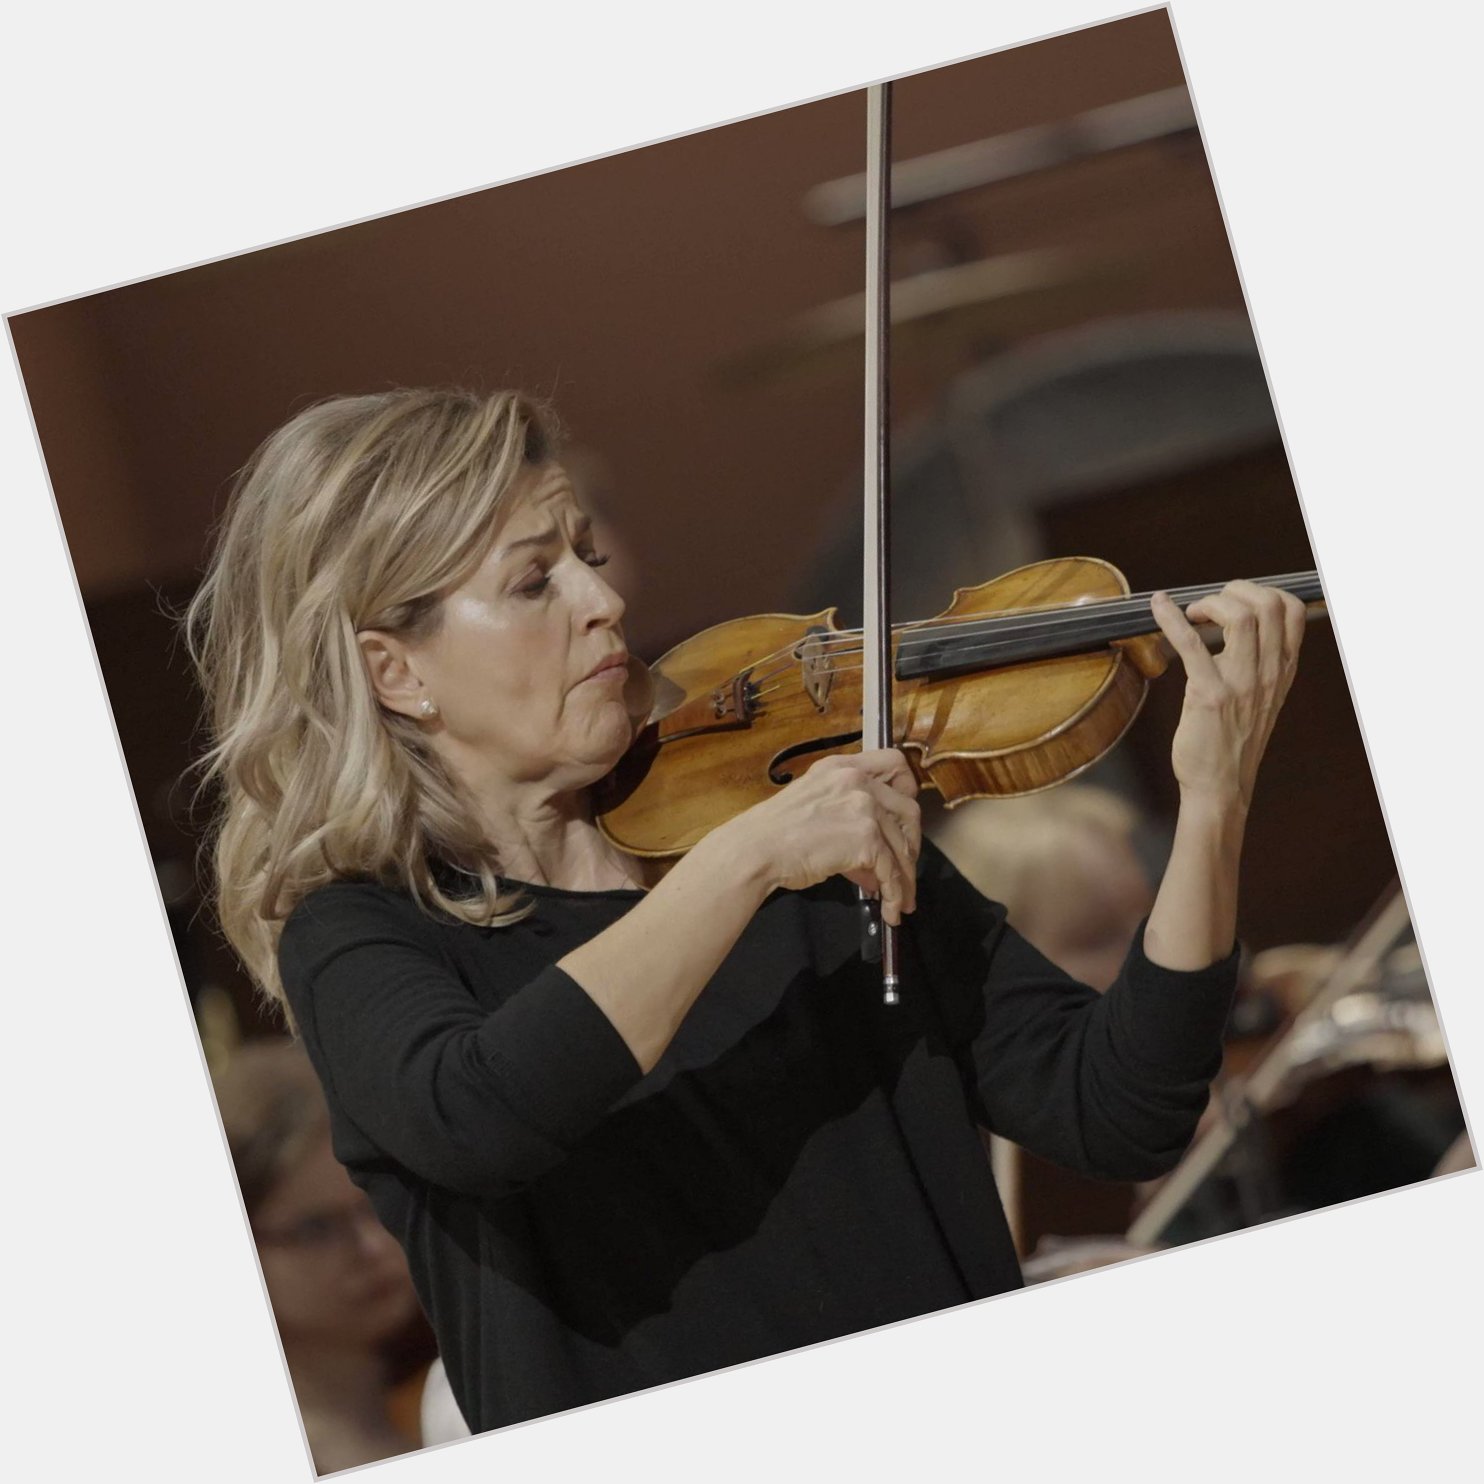 Wishing the one and only Anne-Sophie Mutter a very Happy Birthday. 